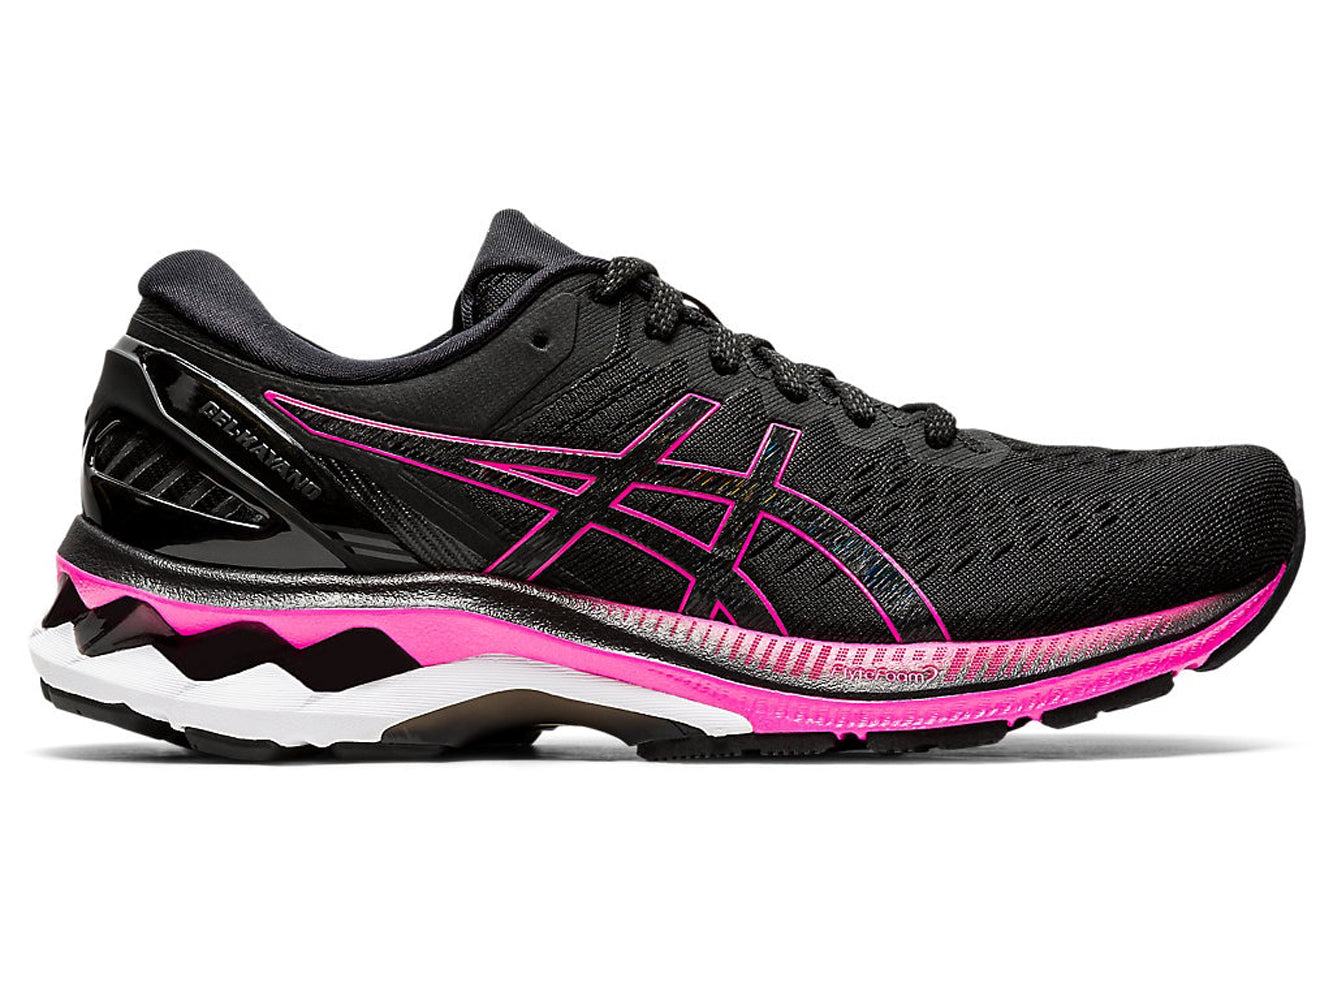 Women's Asics GEL-Kayano 27 Running Shoe in Black/Pink Glo from the side